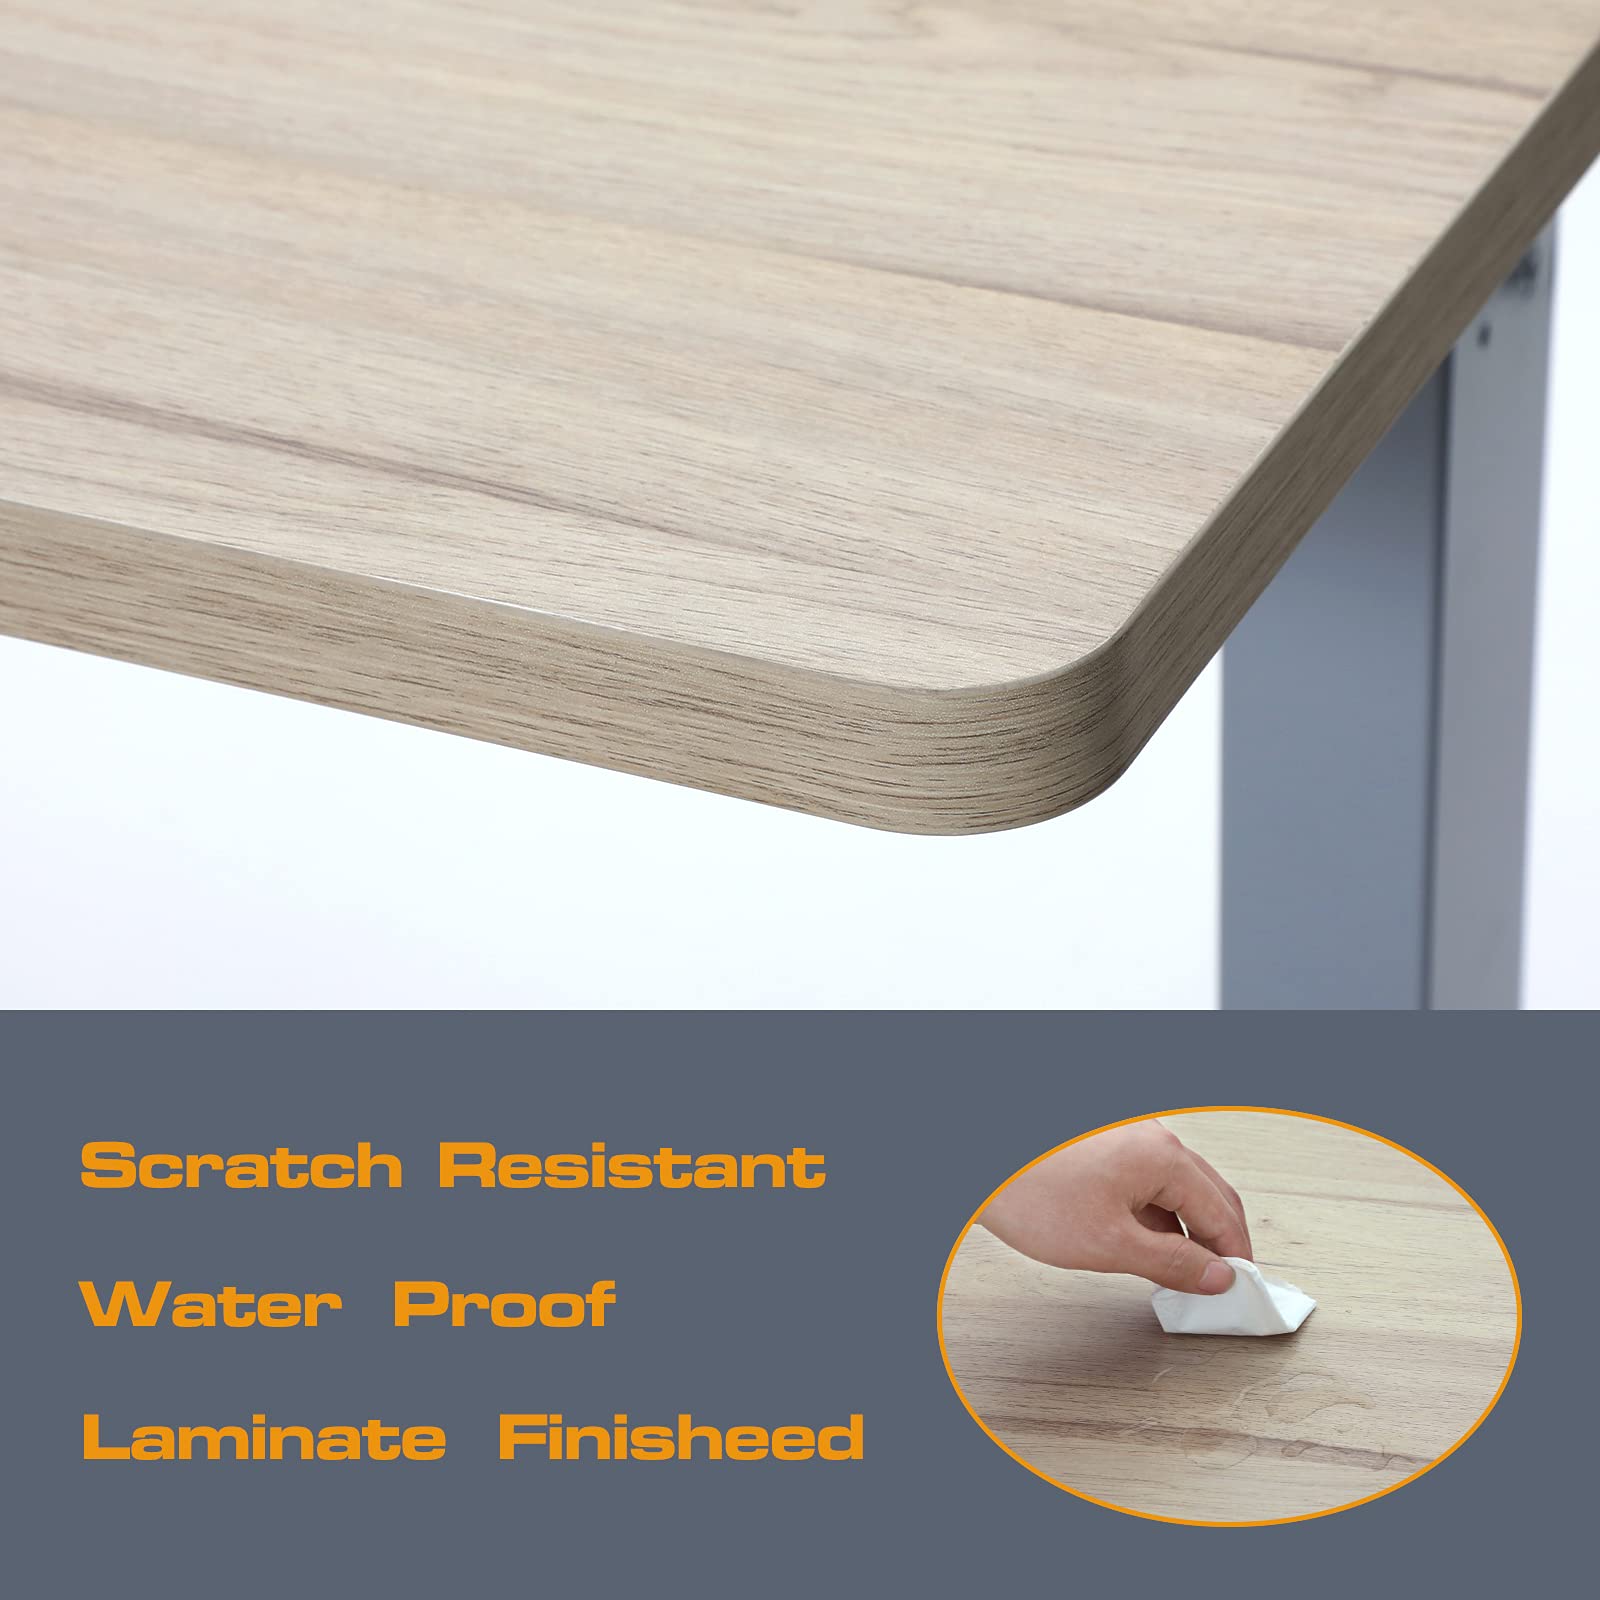 AIMEZO 48 x 28 inch Table Top Table Solid One-Piece Table Top Universal Desk Top for Standing and Sit to Stand Height Adjustable Desk Frames Light Oak